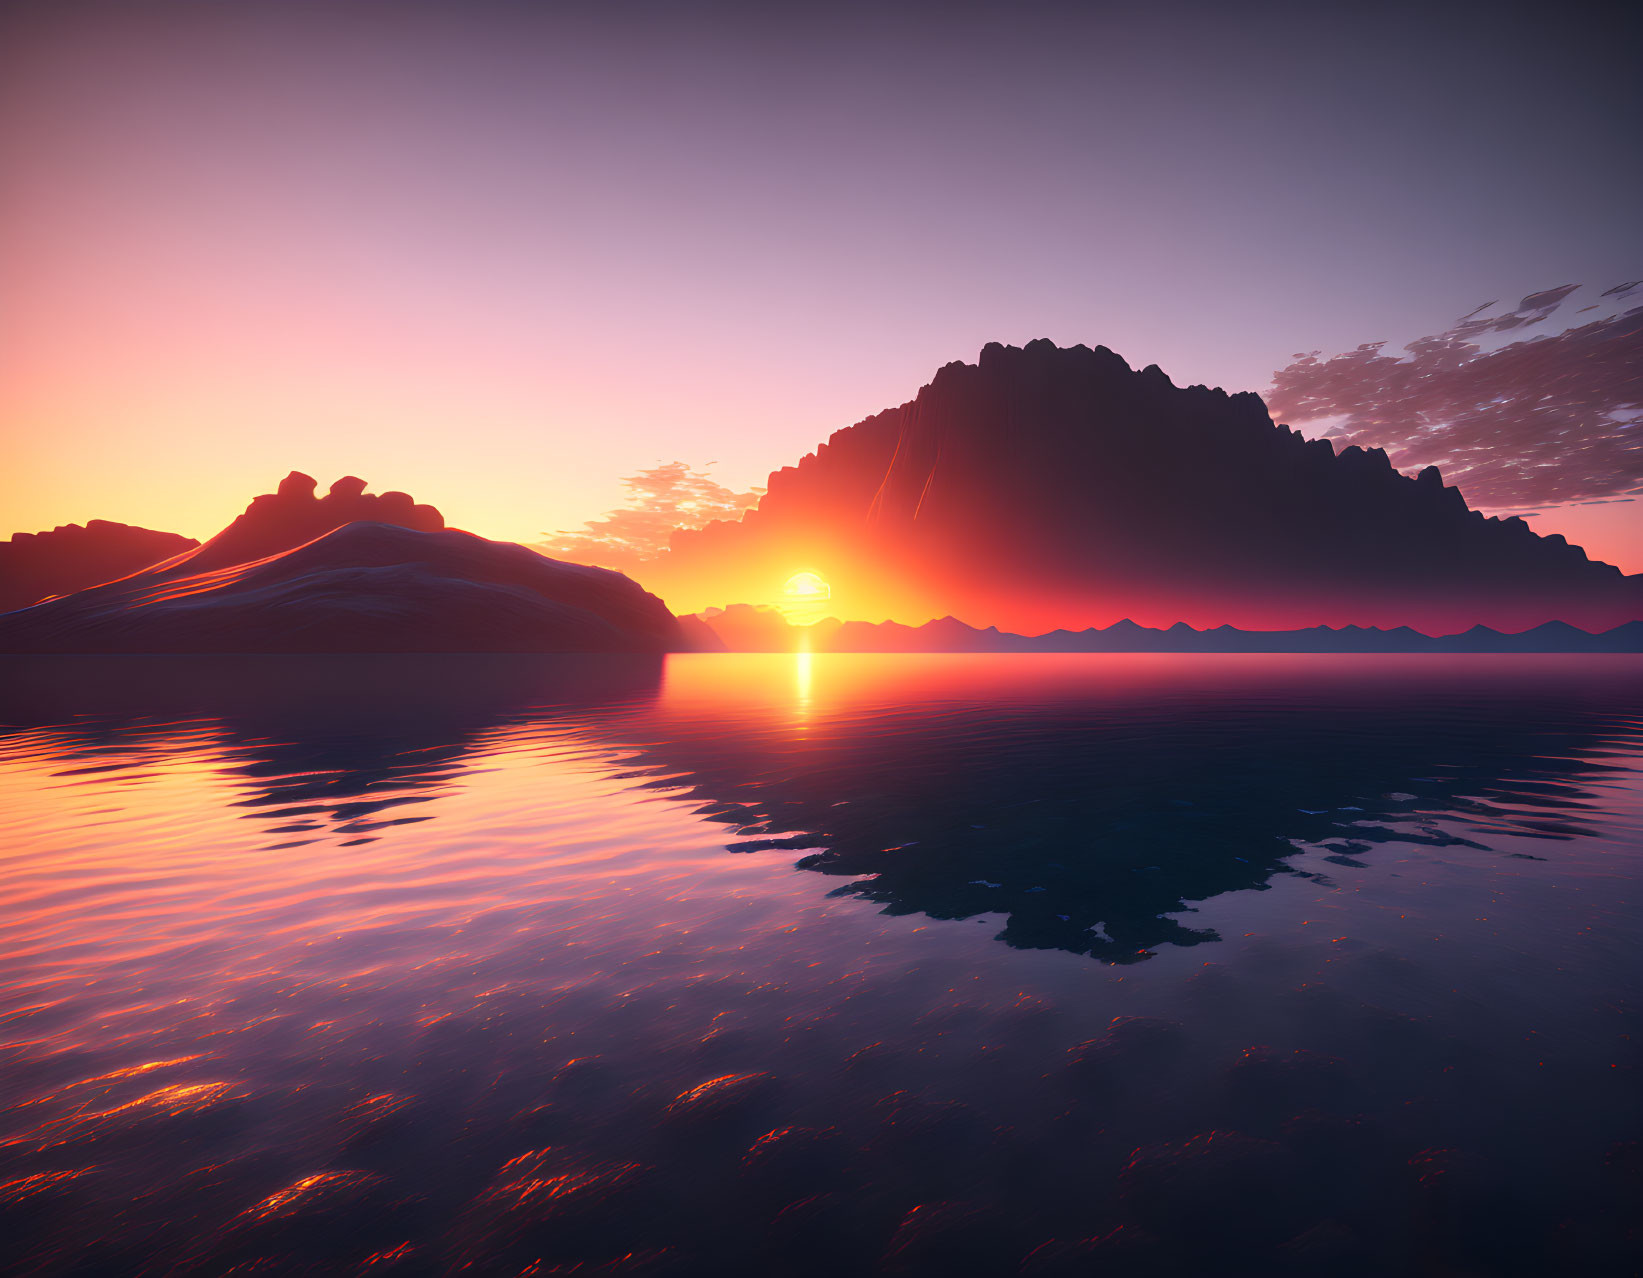 Scenic sunset over calm waters with mountain silhouettes